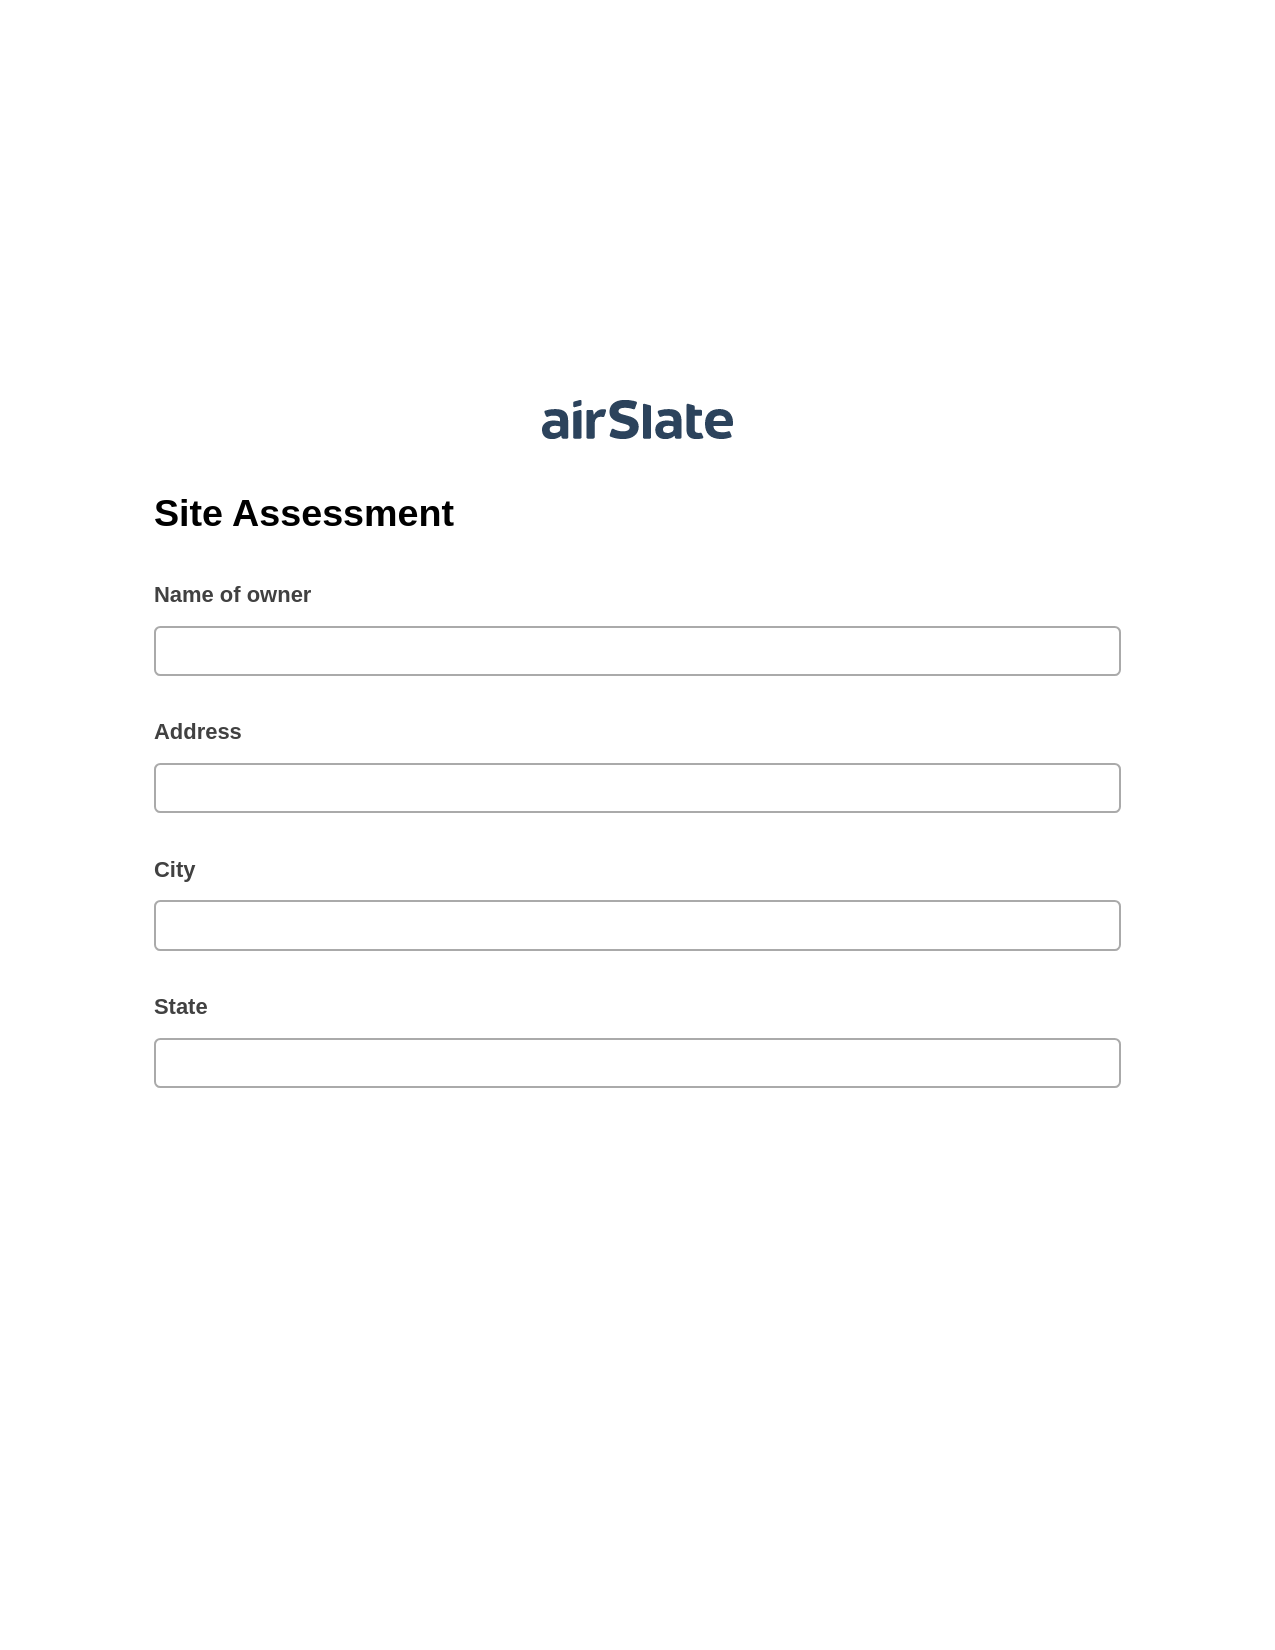 Site Assessment Pre-fill from another Slate Bot, Create slate bot, Archive to SharePoint Folder Bot